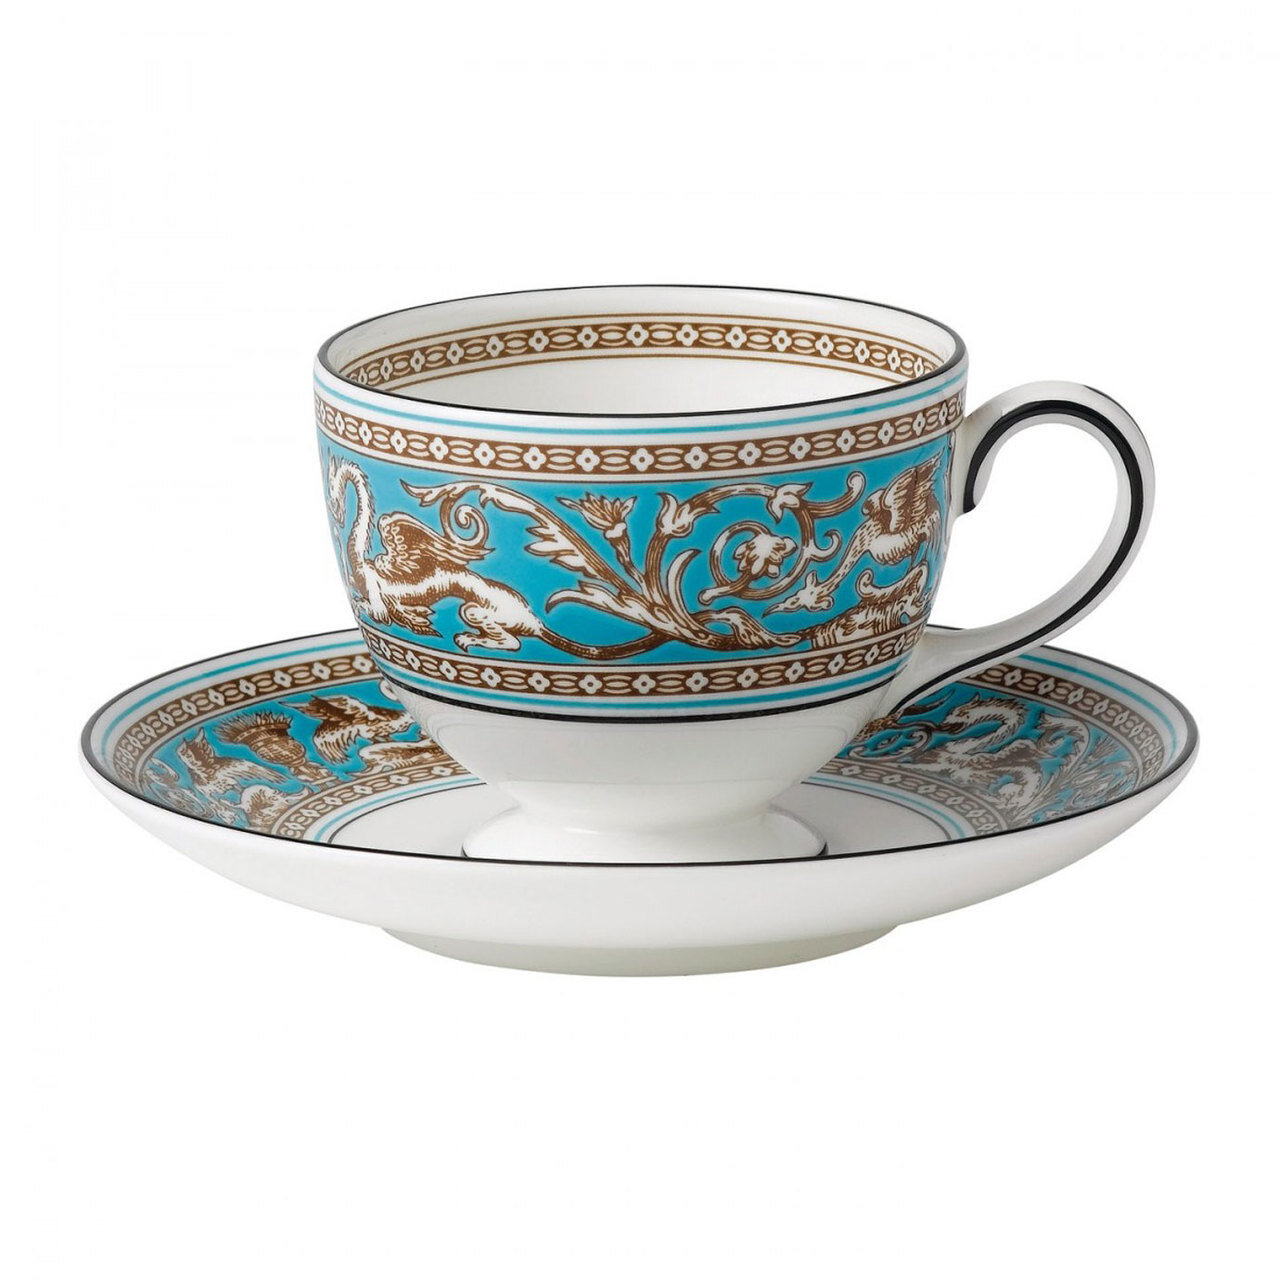 Wedgwood Florentine Turquoise Teacup and Saucer Set Leigh